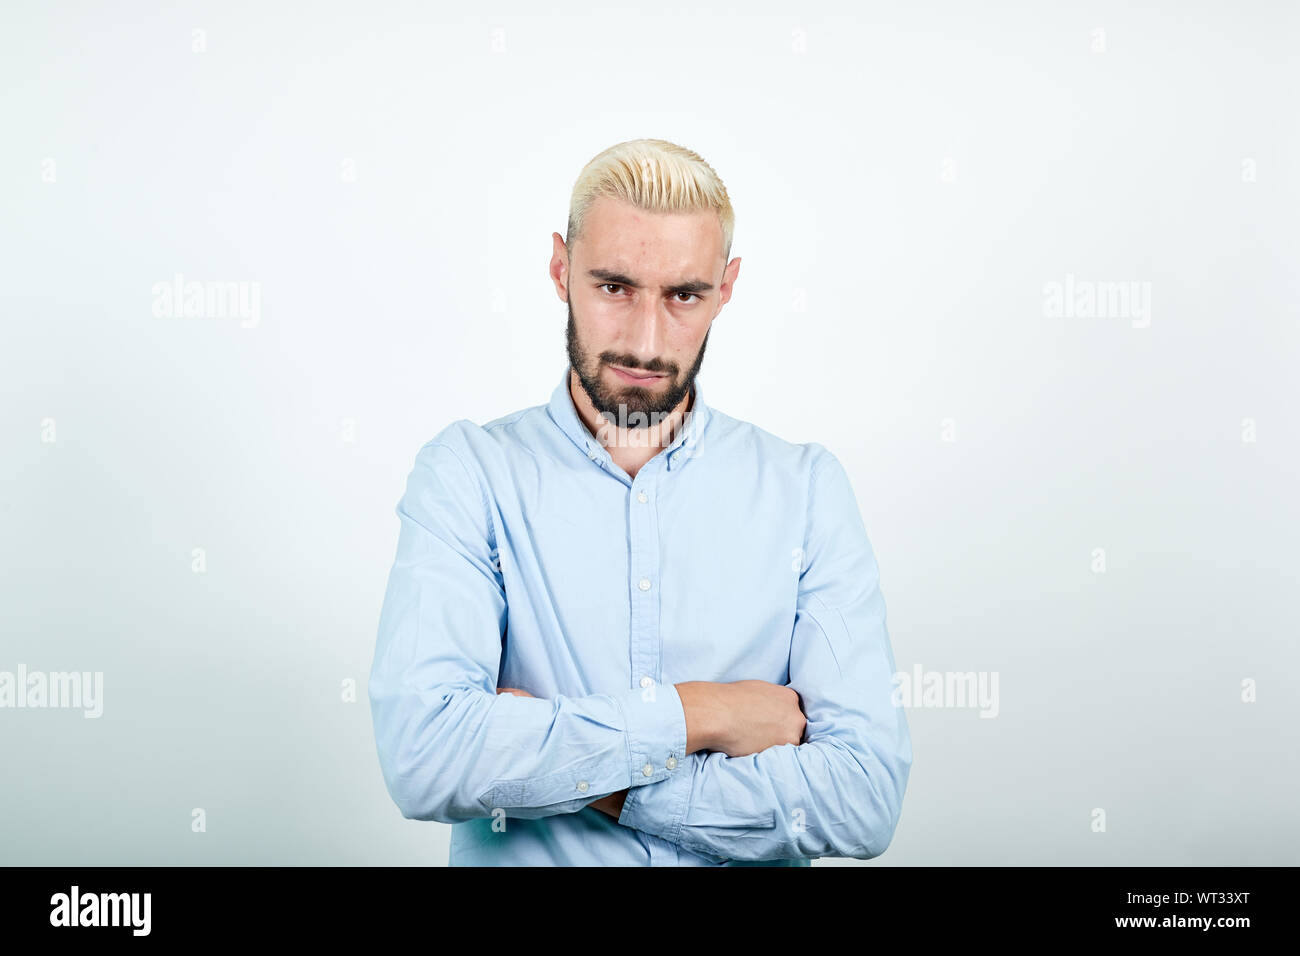 British man with blond hair and beard - wide 11